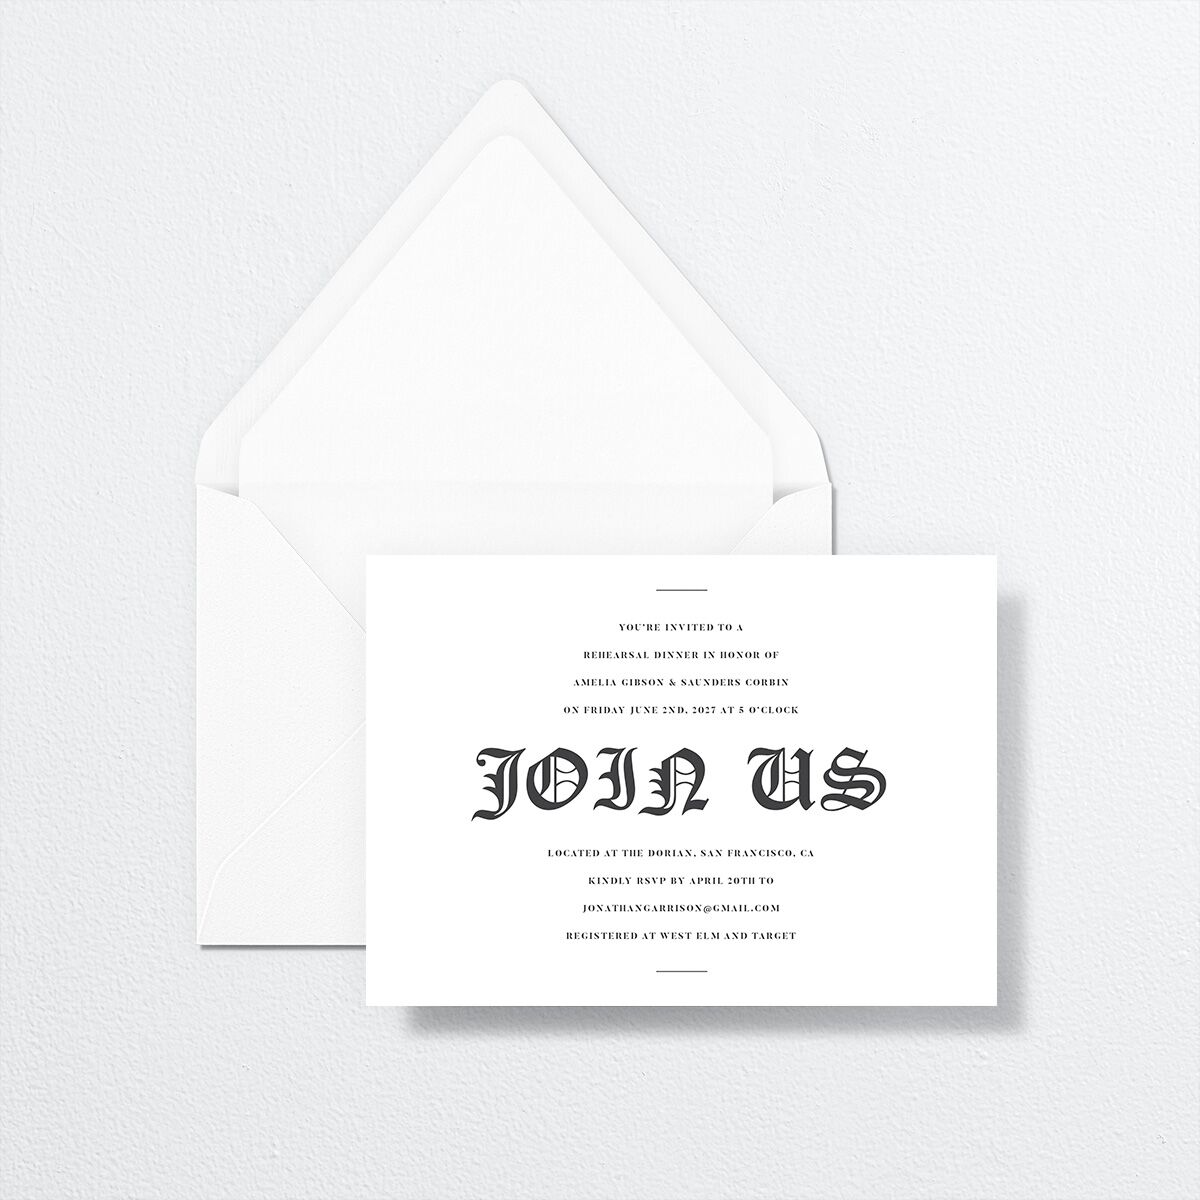 I Do Rehearsal Dinner Invitations by Vera Wang envelope-and-liner in white